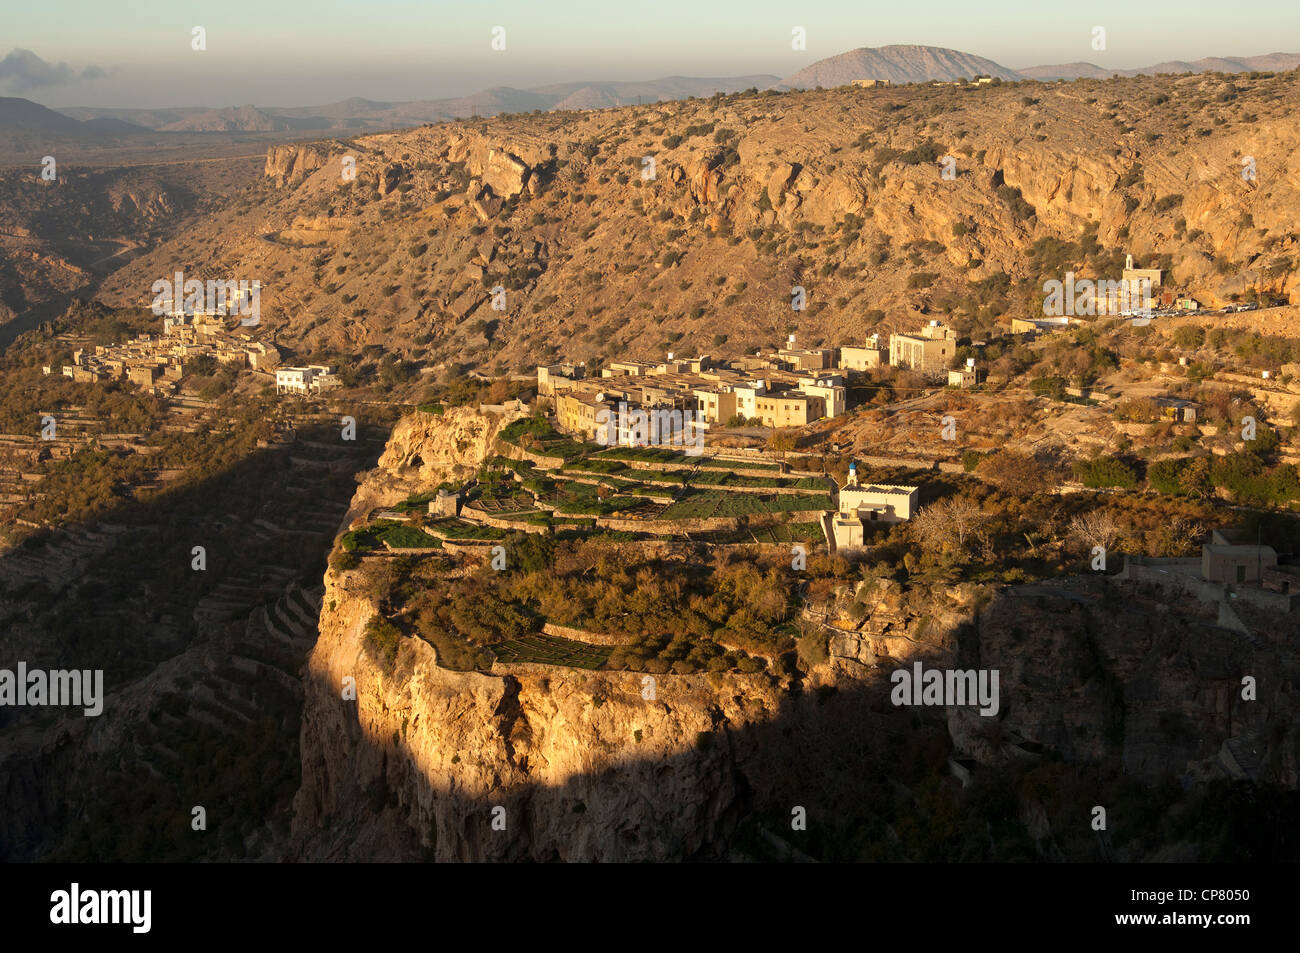 The villages of Ash Sharaijah with its terrace plots and Sayq on the Sayq Plateau in the evening light, Jebel al Alkhdar, Oman Stock Photo